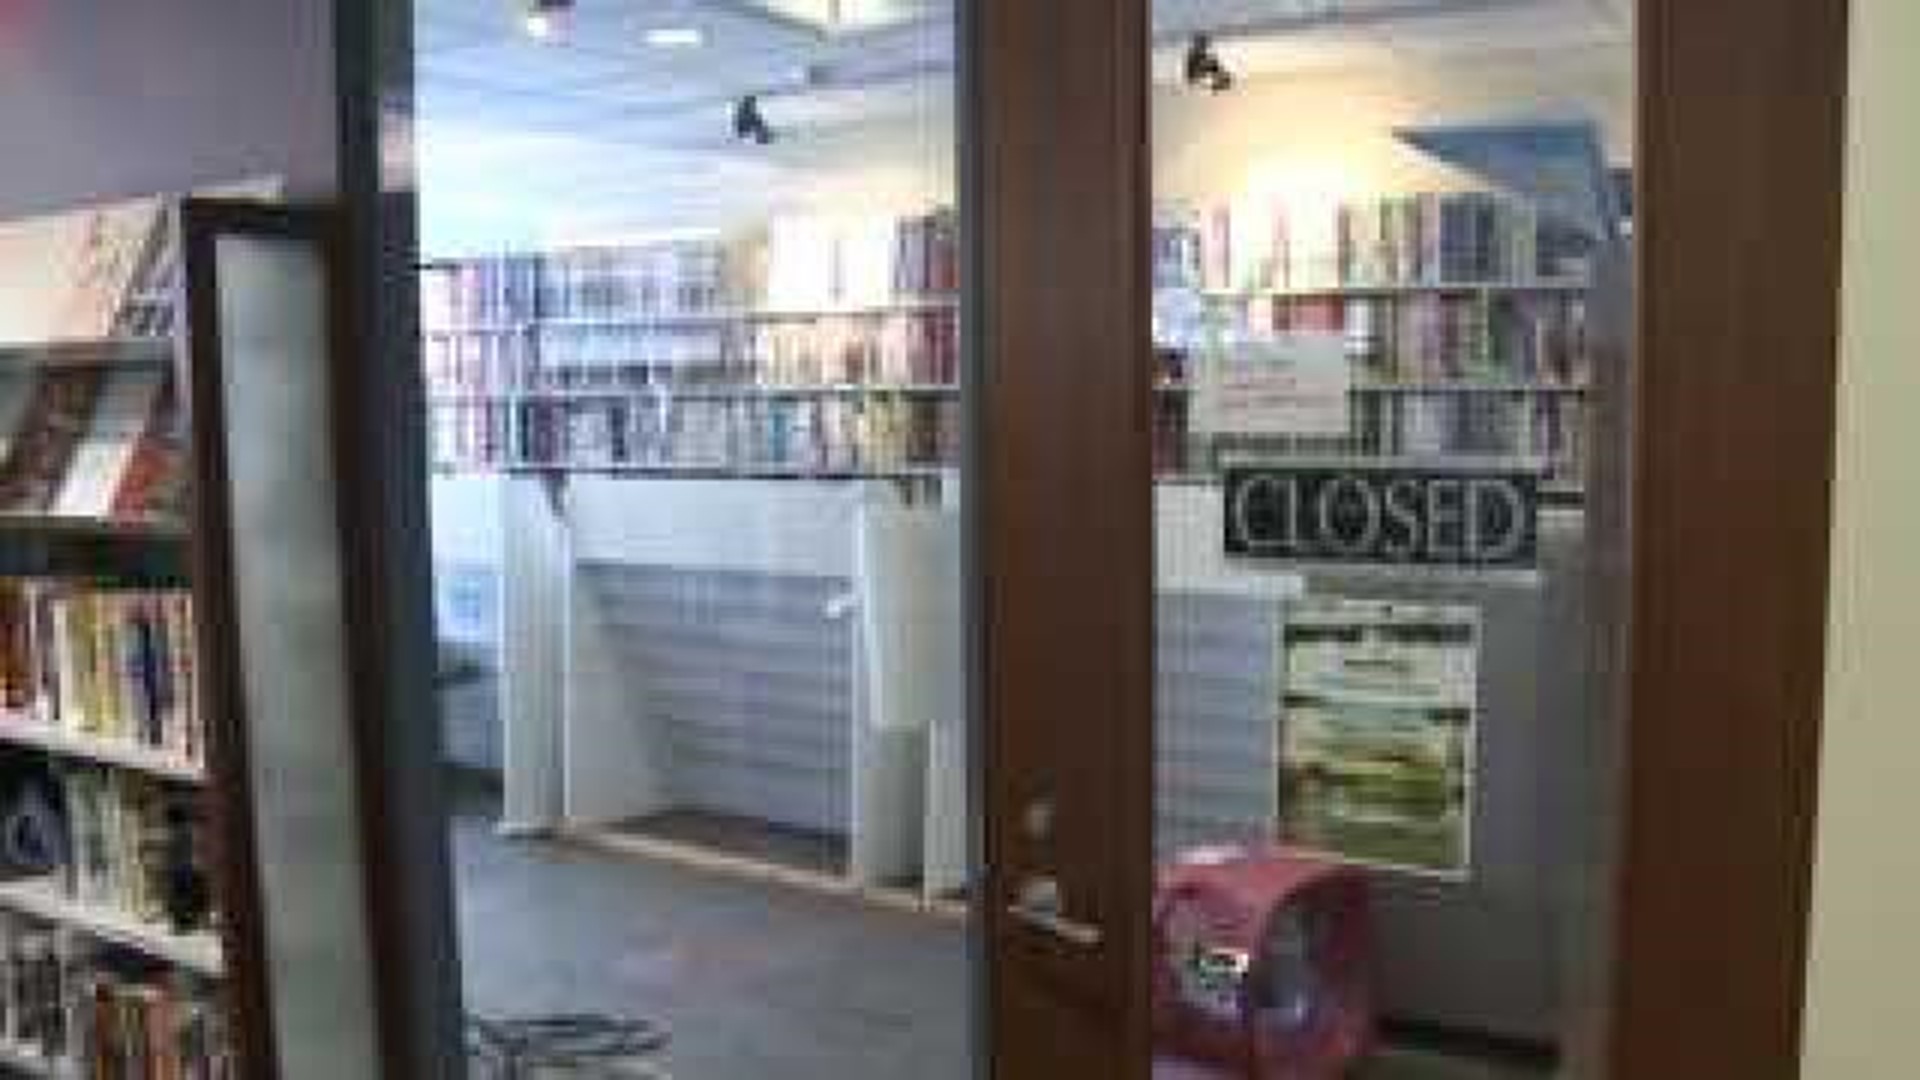 Water damage closes Moline Public Library